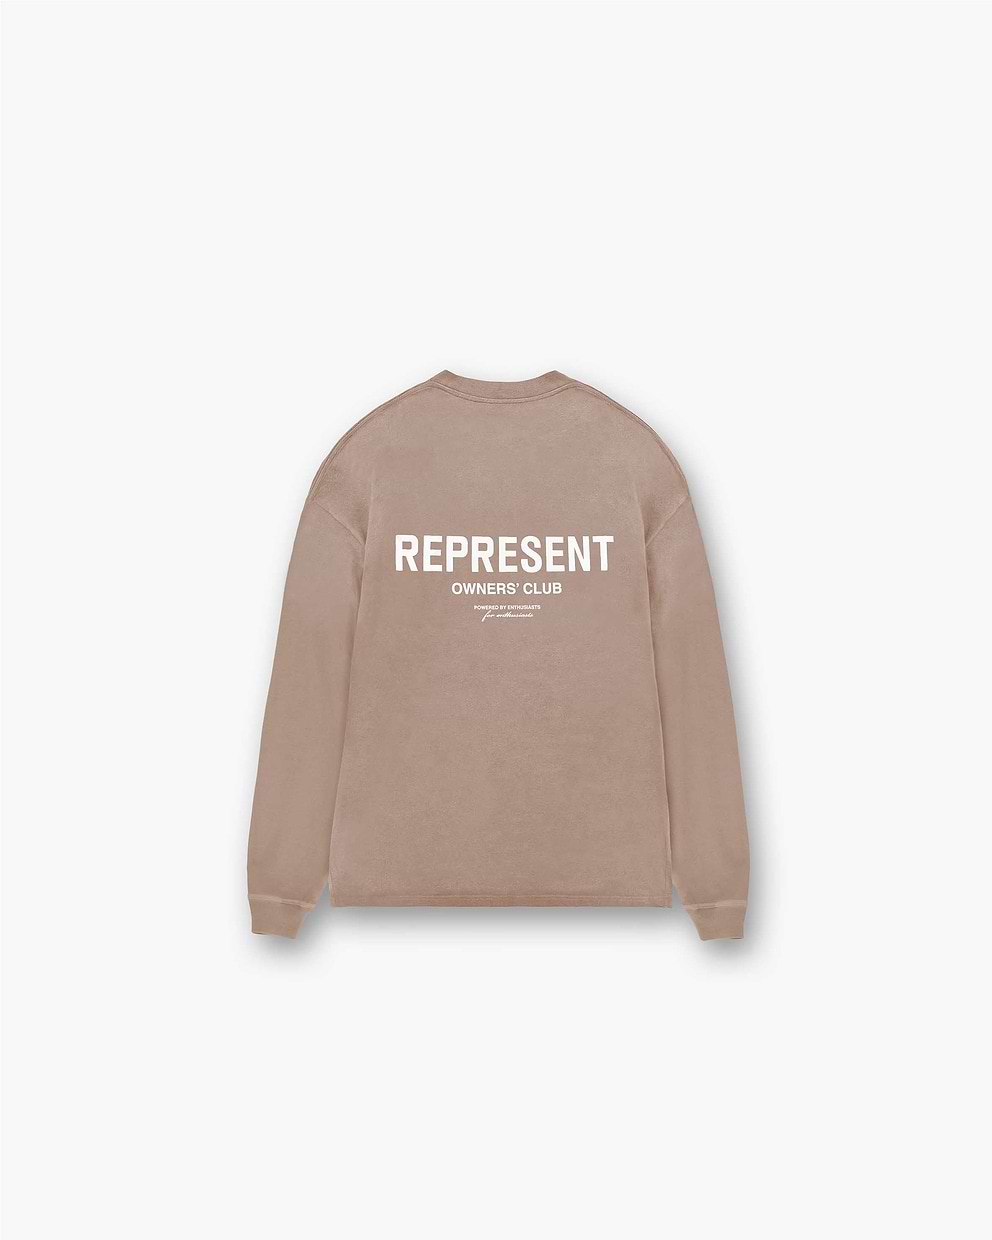 Represent Owners Club Long Sleeve T-Shirt - Stucco